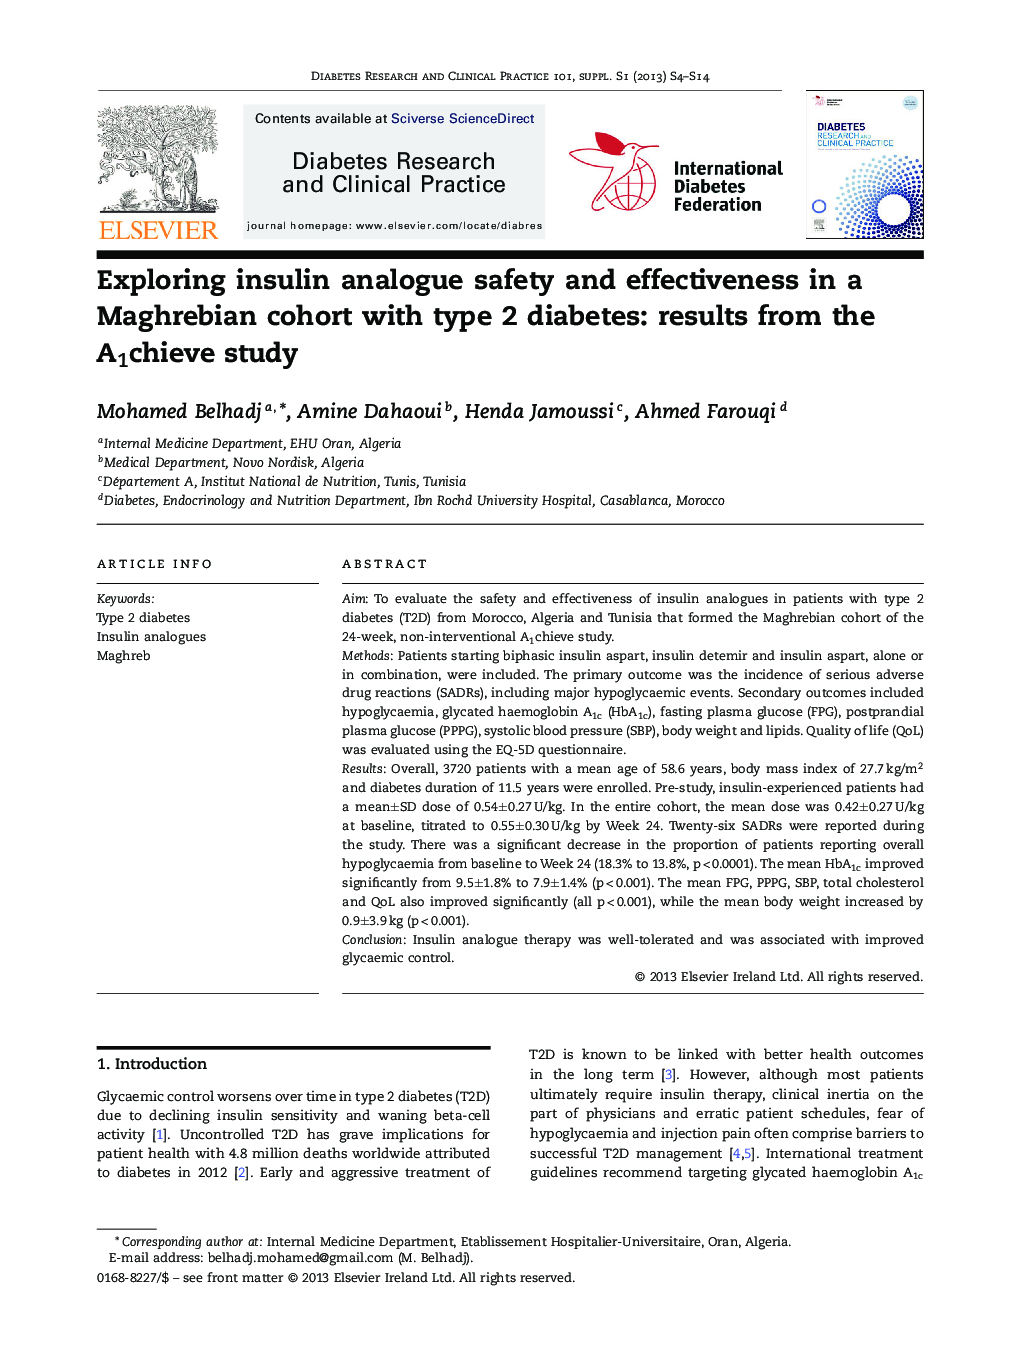 Exploring insulin analogue safety and effectiveness in a Maghrebian cohort with type 2 diabetes: results from the A1chieve study